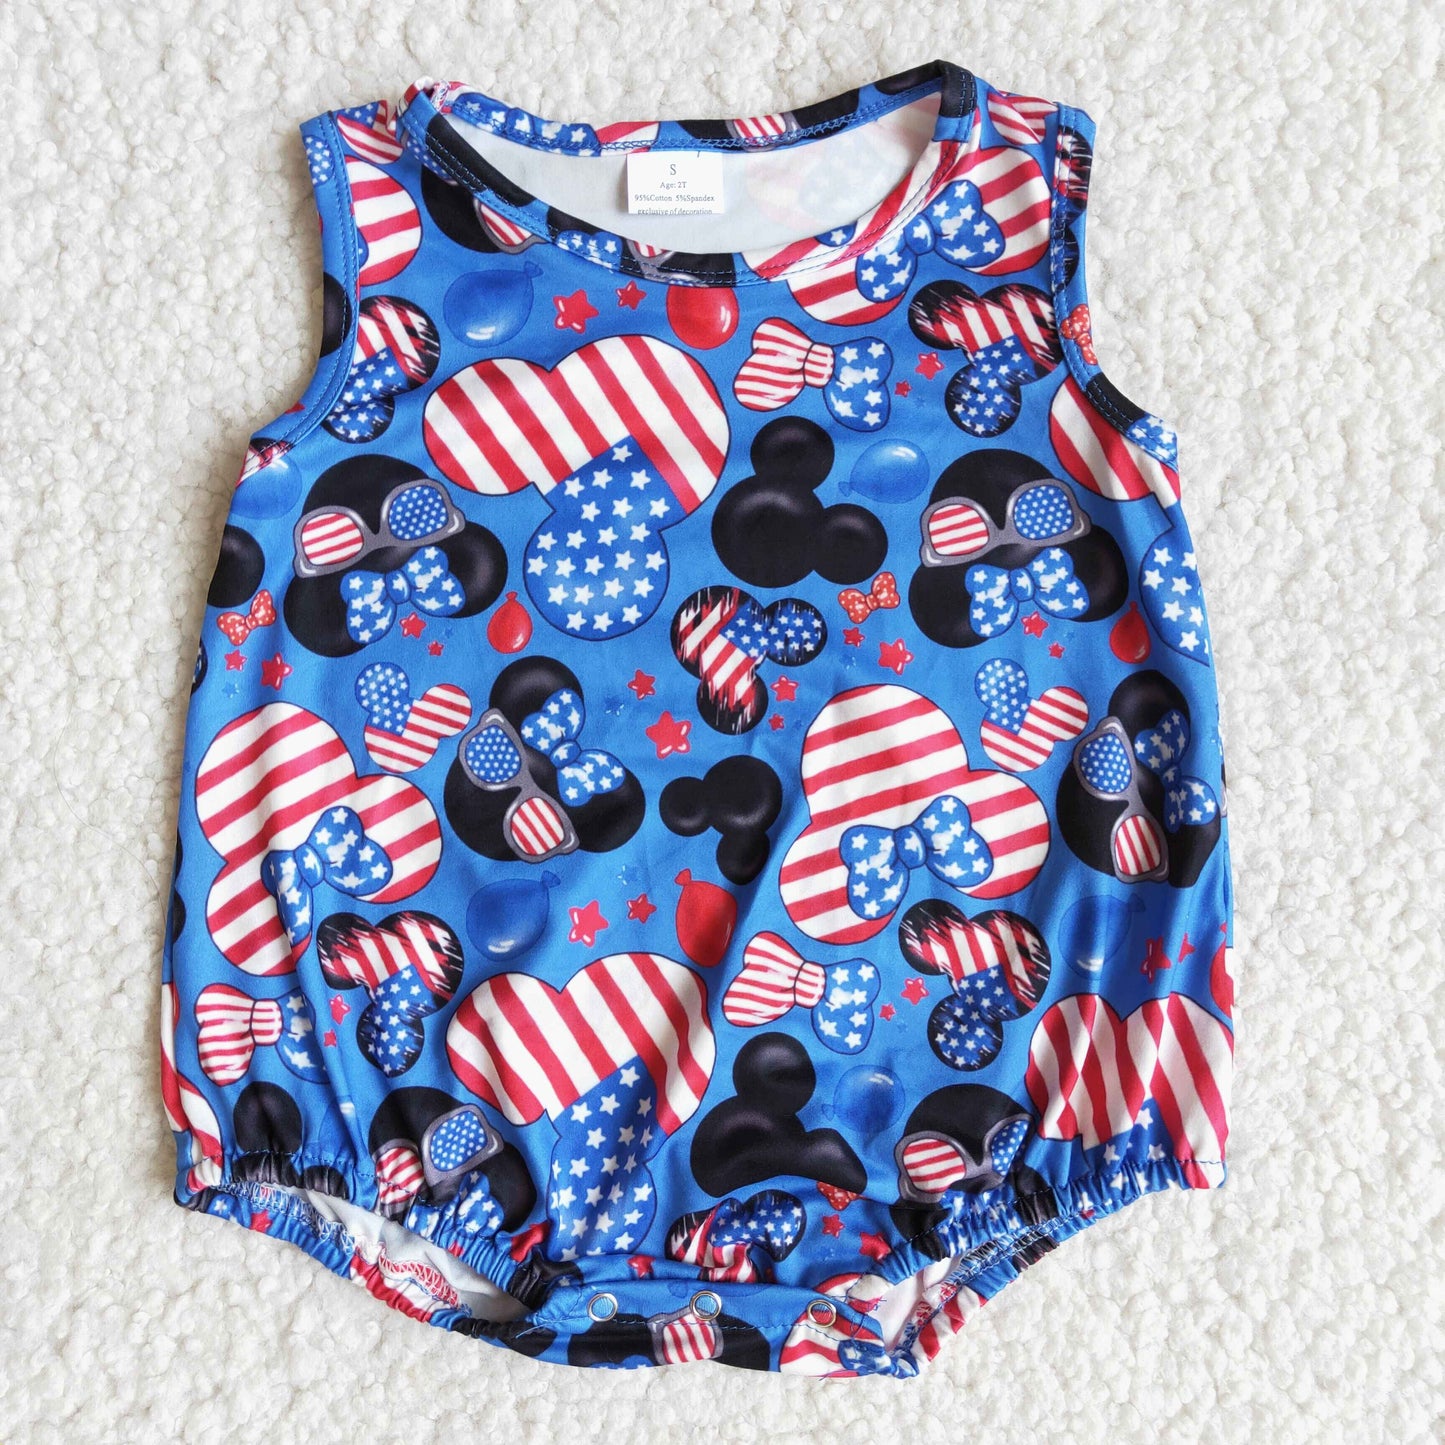 Star stripe cute print sleeveless mouse bubble 4th of july baby romper